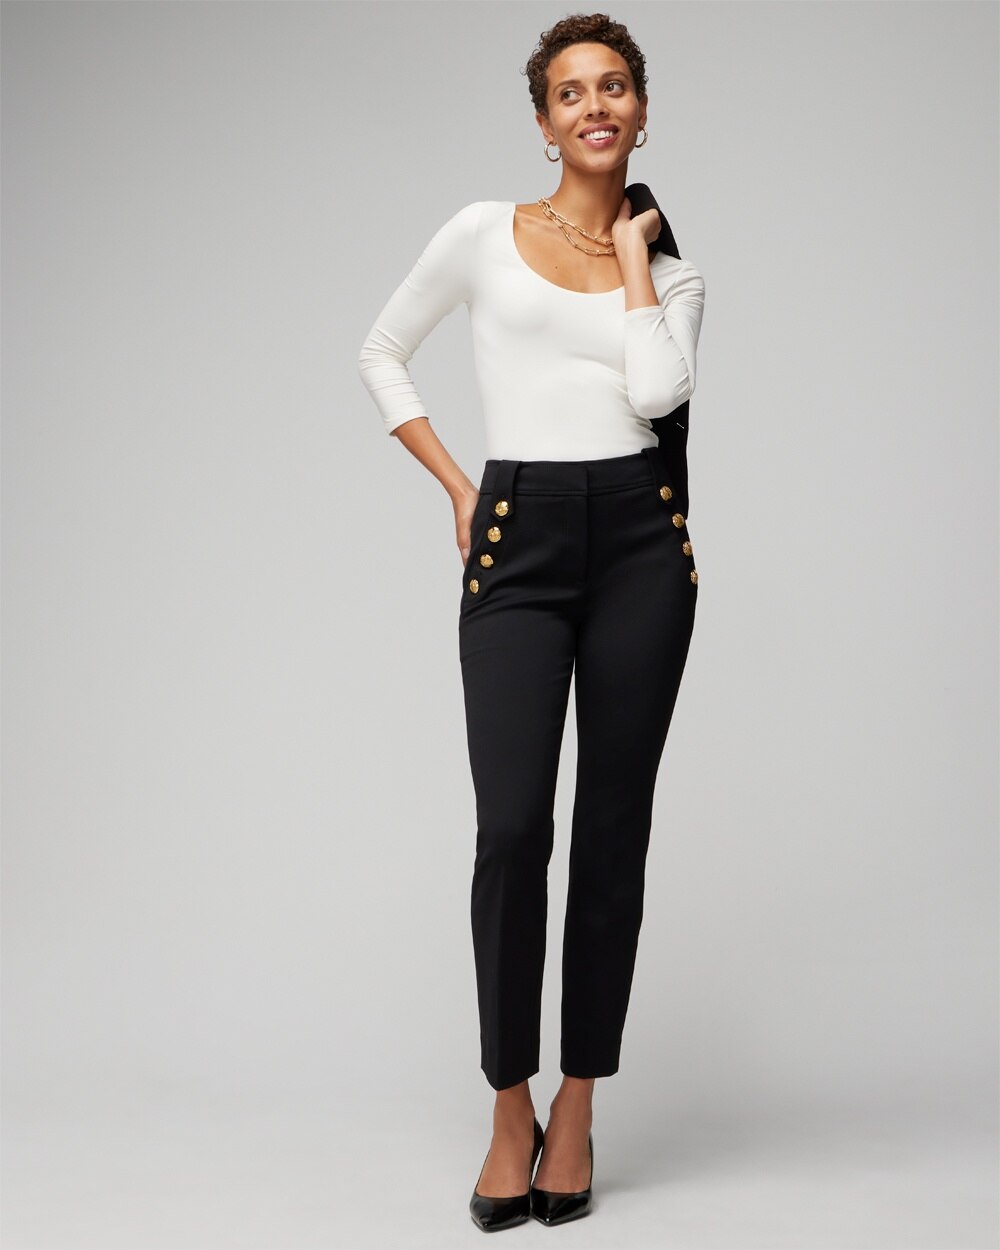 WHBM\u00AE Jolie Button Straight Luxe Stretch Pant video preview image, click to start video